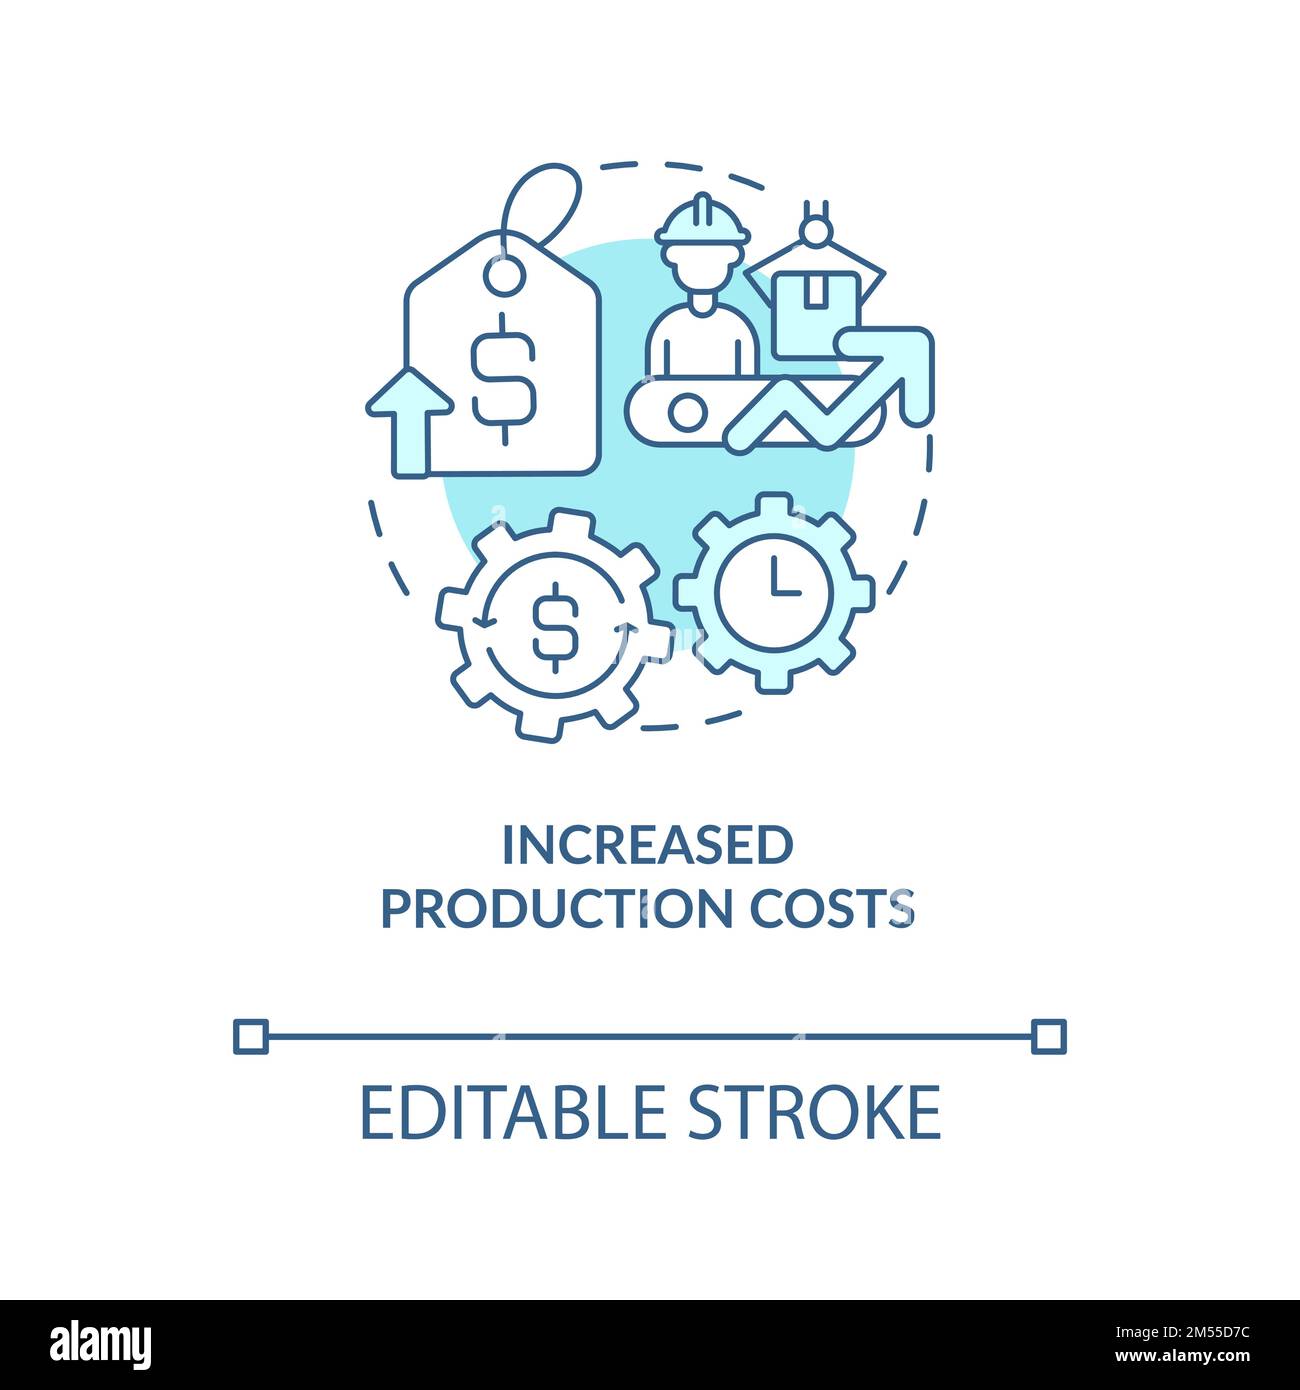 Increased production costs blue concept icon Stock Vector